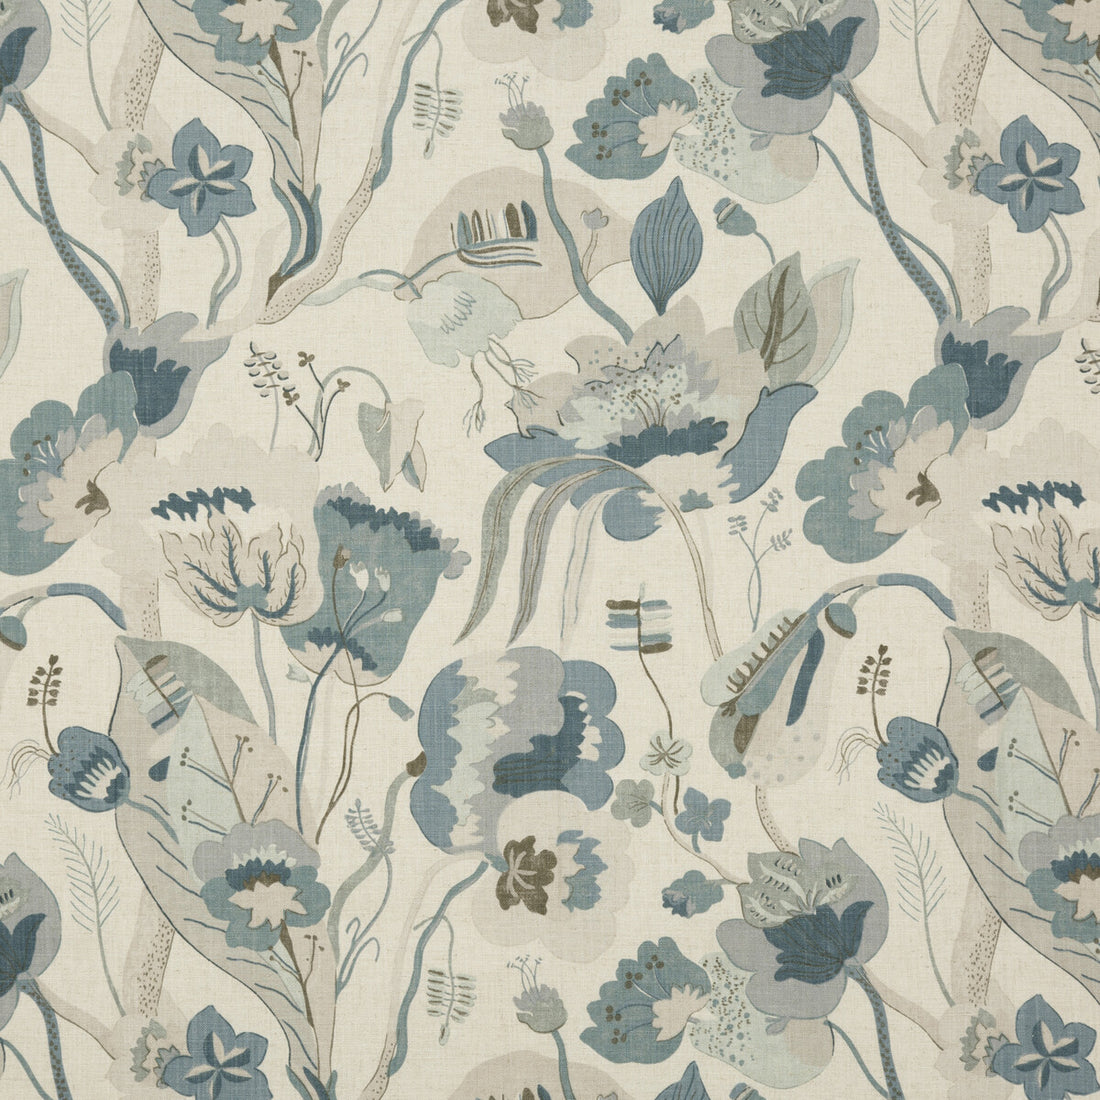 California fabric in linen/denim color - pattern SP-BP10631.2.0 - by G P &amp; J Baker in the Specials Book collection